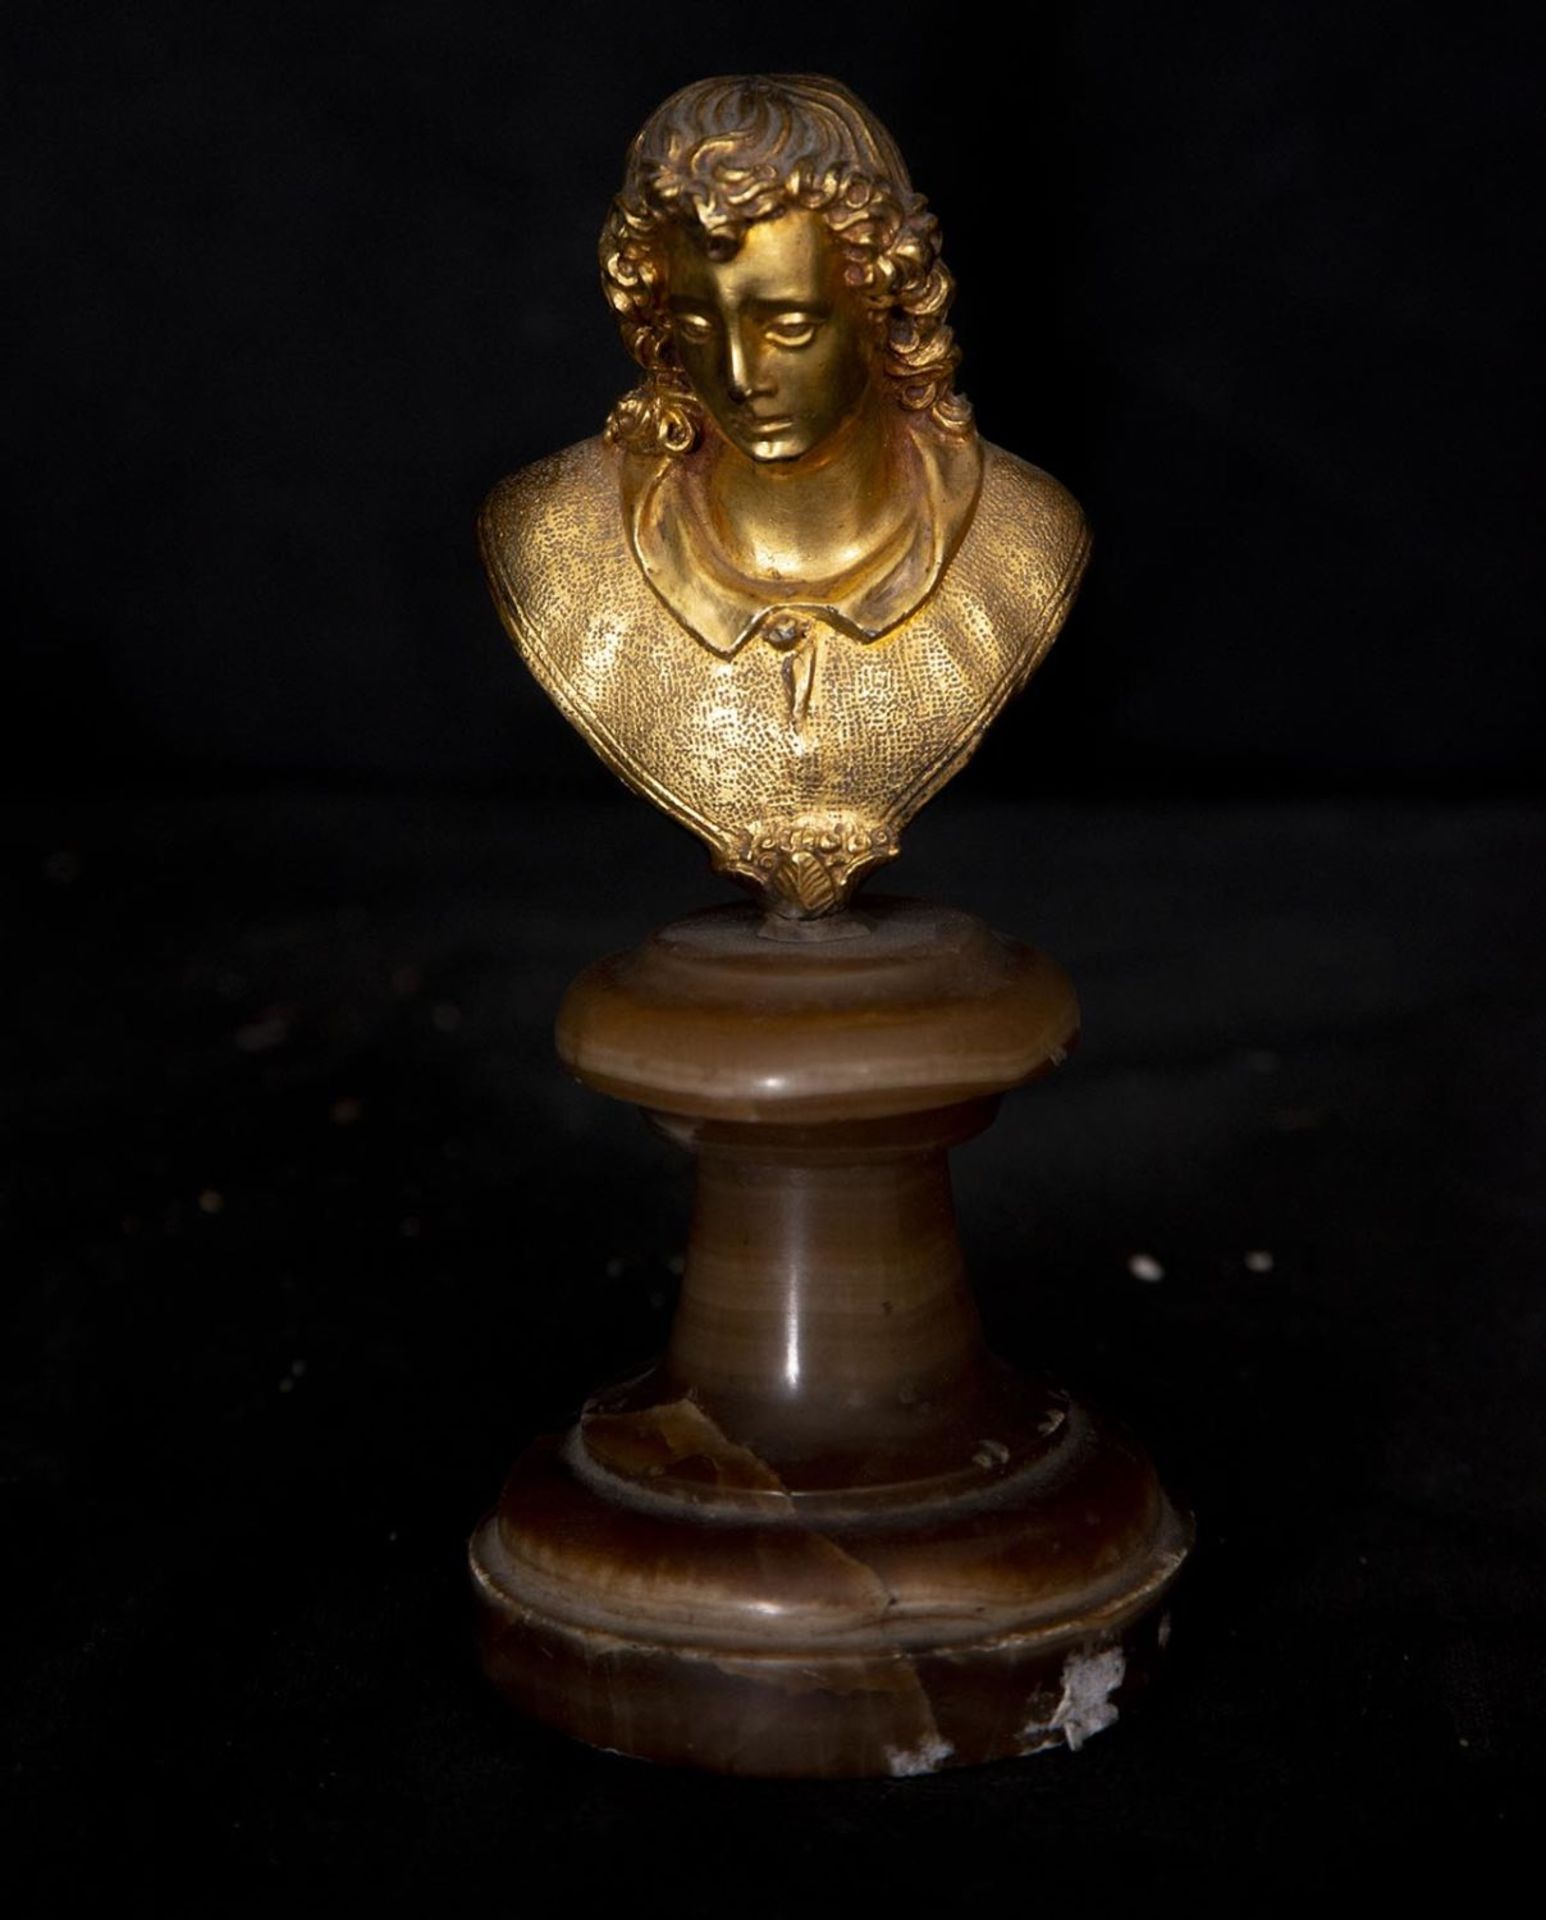 Exquisite bust in gilt bronze with onyx base, Italian school of Alessandro Algardi, Italy, 17th cent